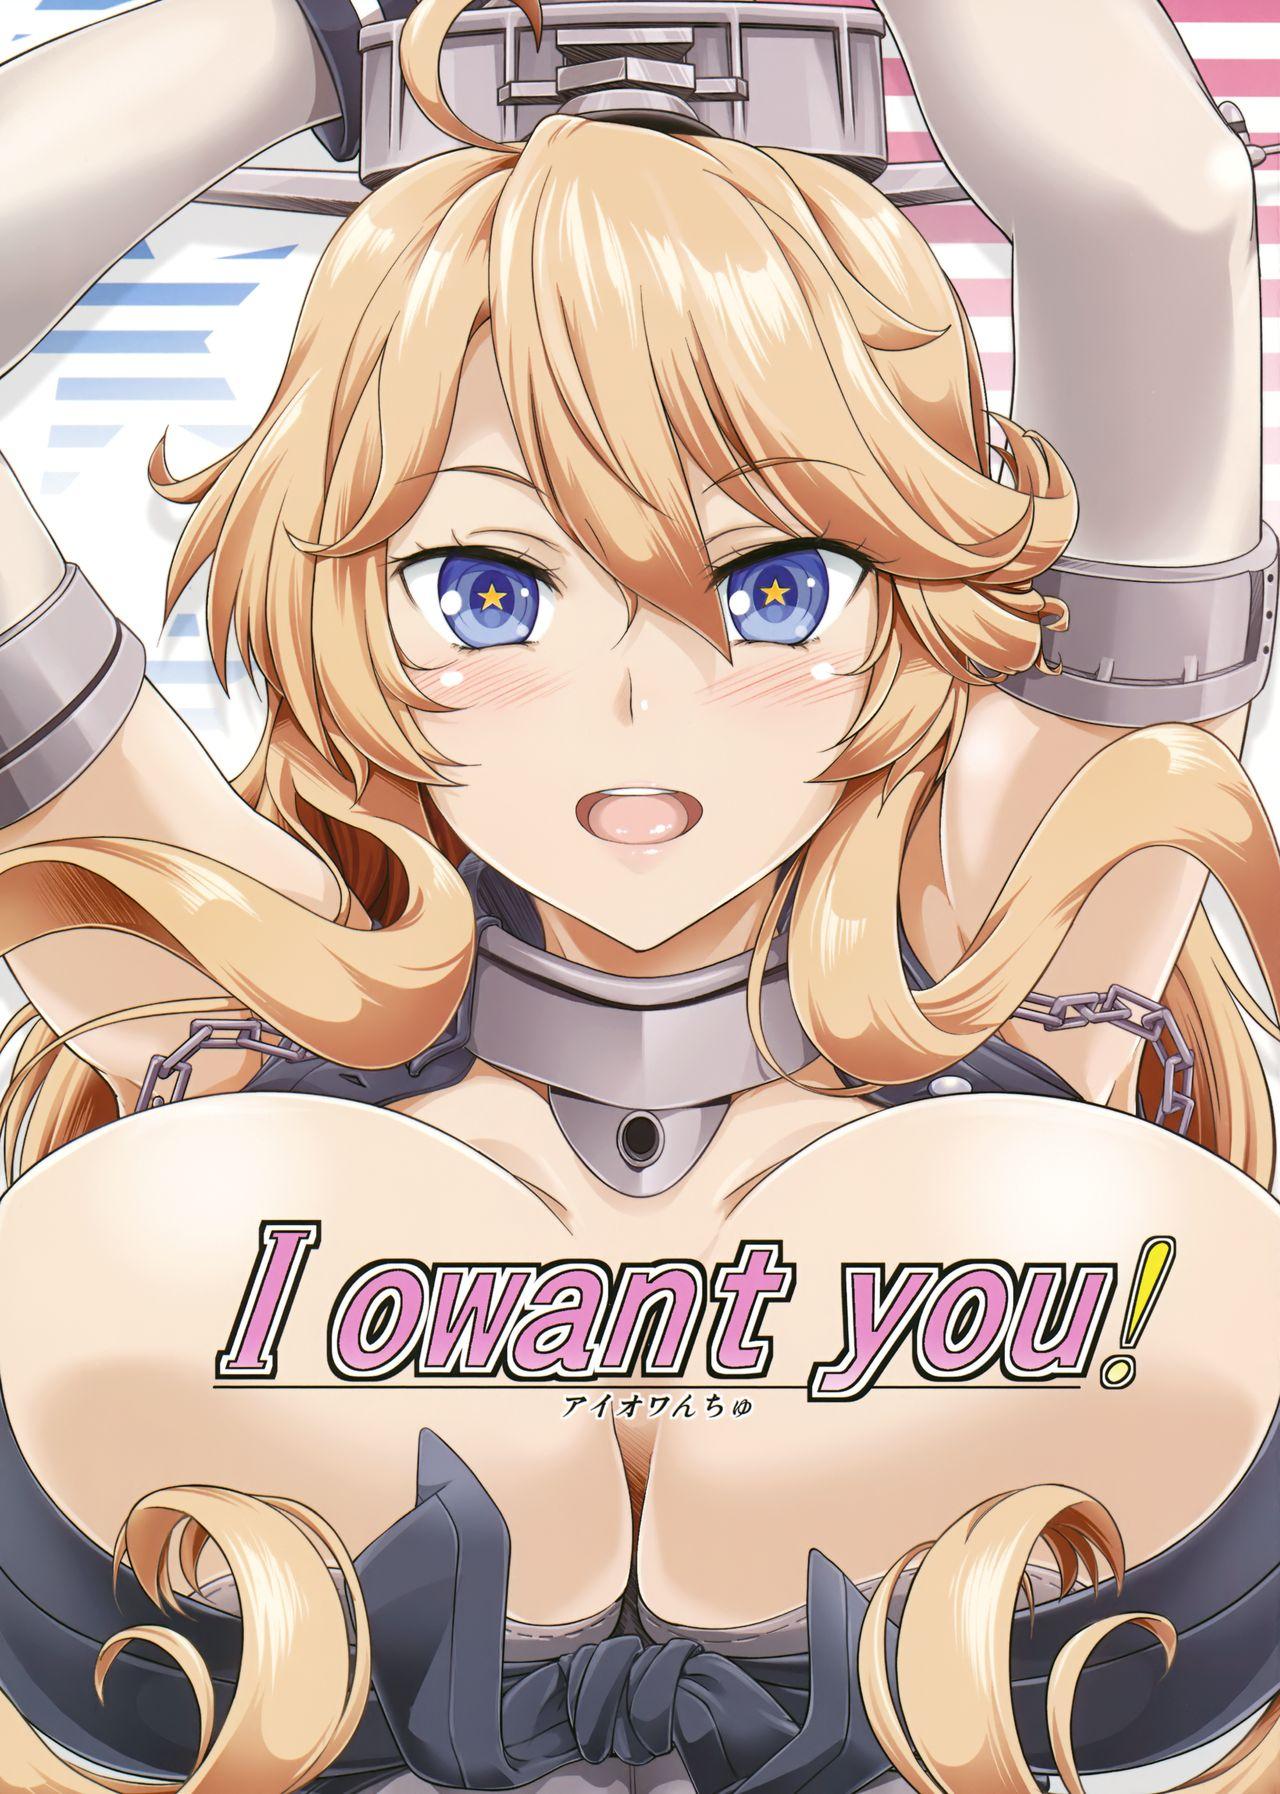 Full Movie I owant you! - Kantai collection Role Play - Page 2